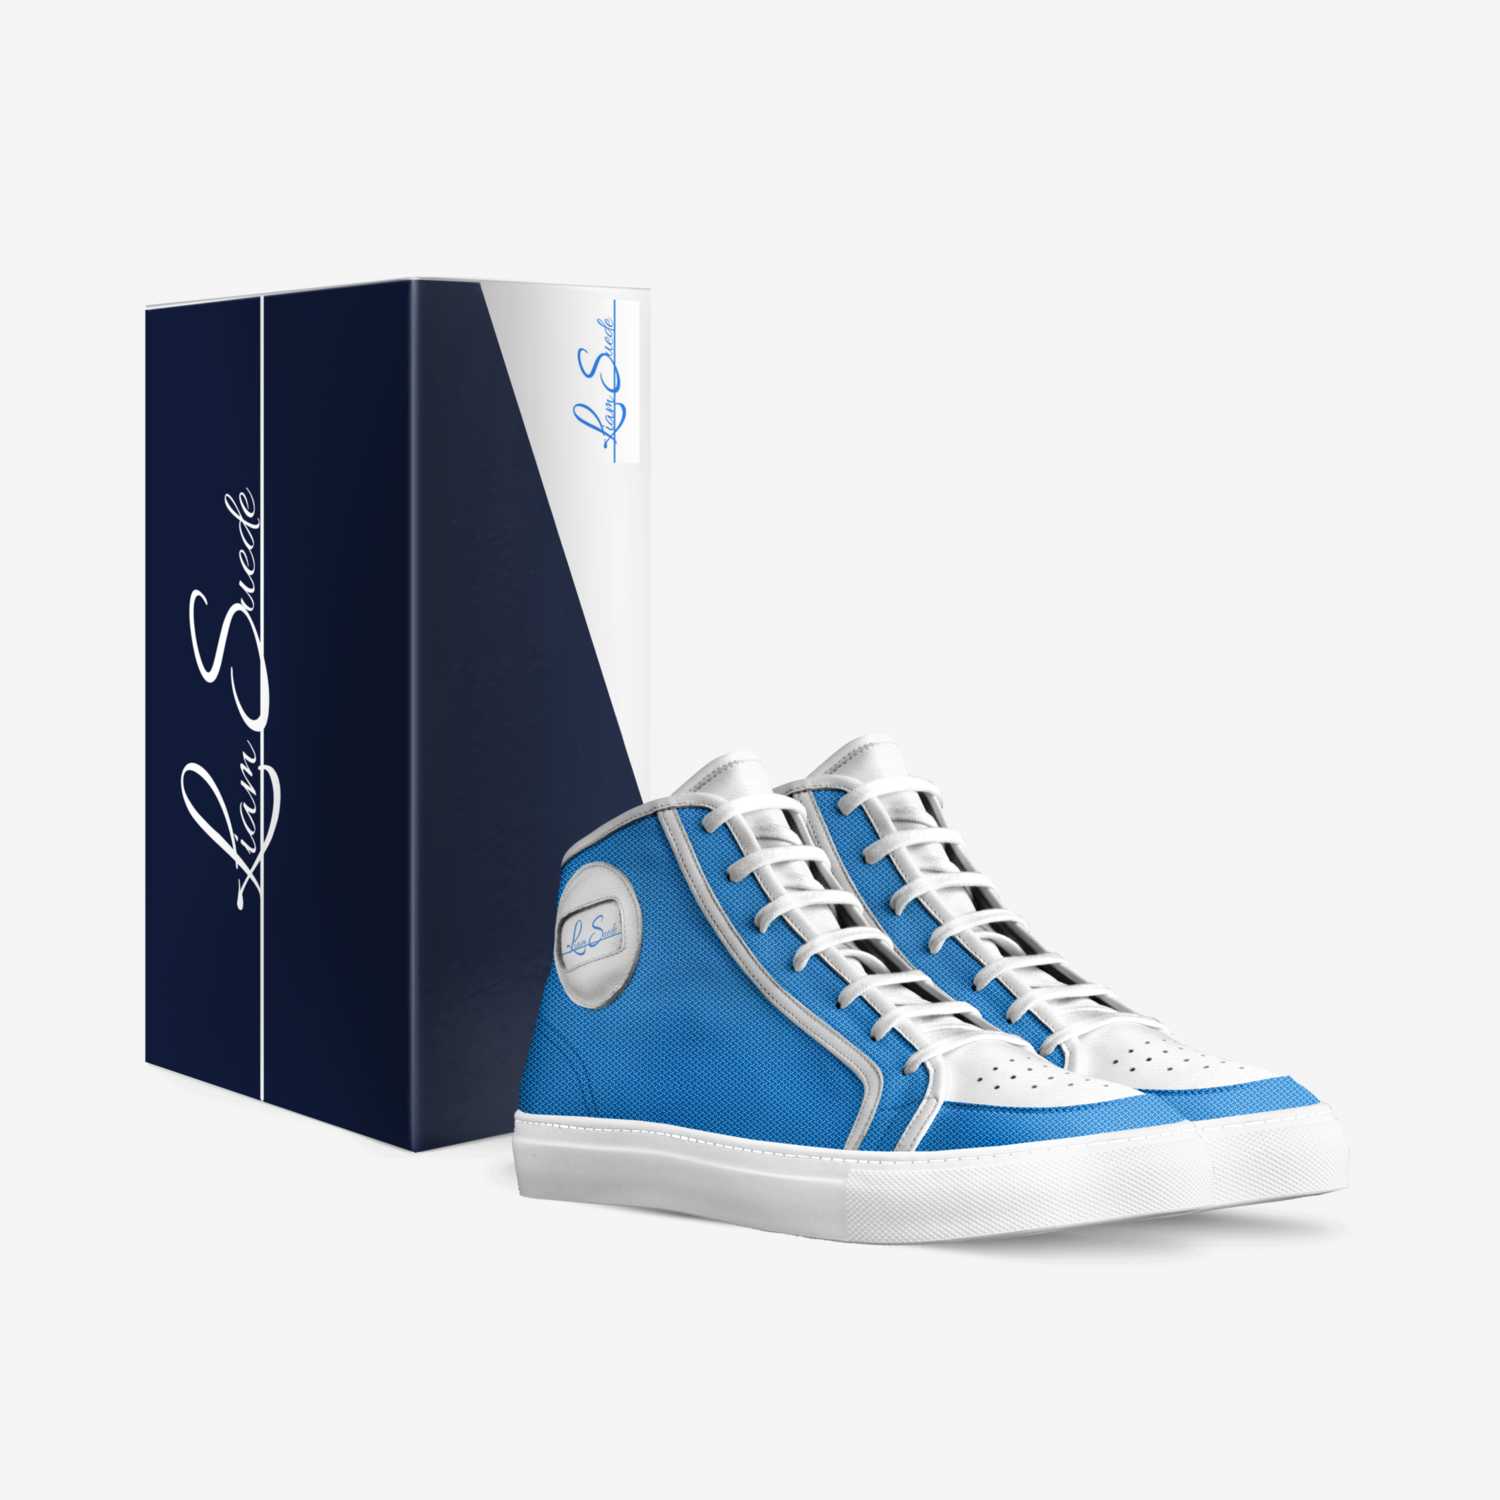 SKY BOX custom made in Italy shoes by Liam Suede | Box view